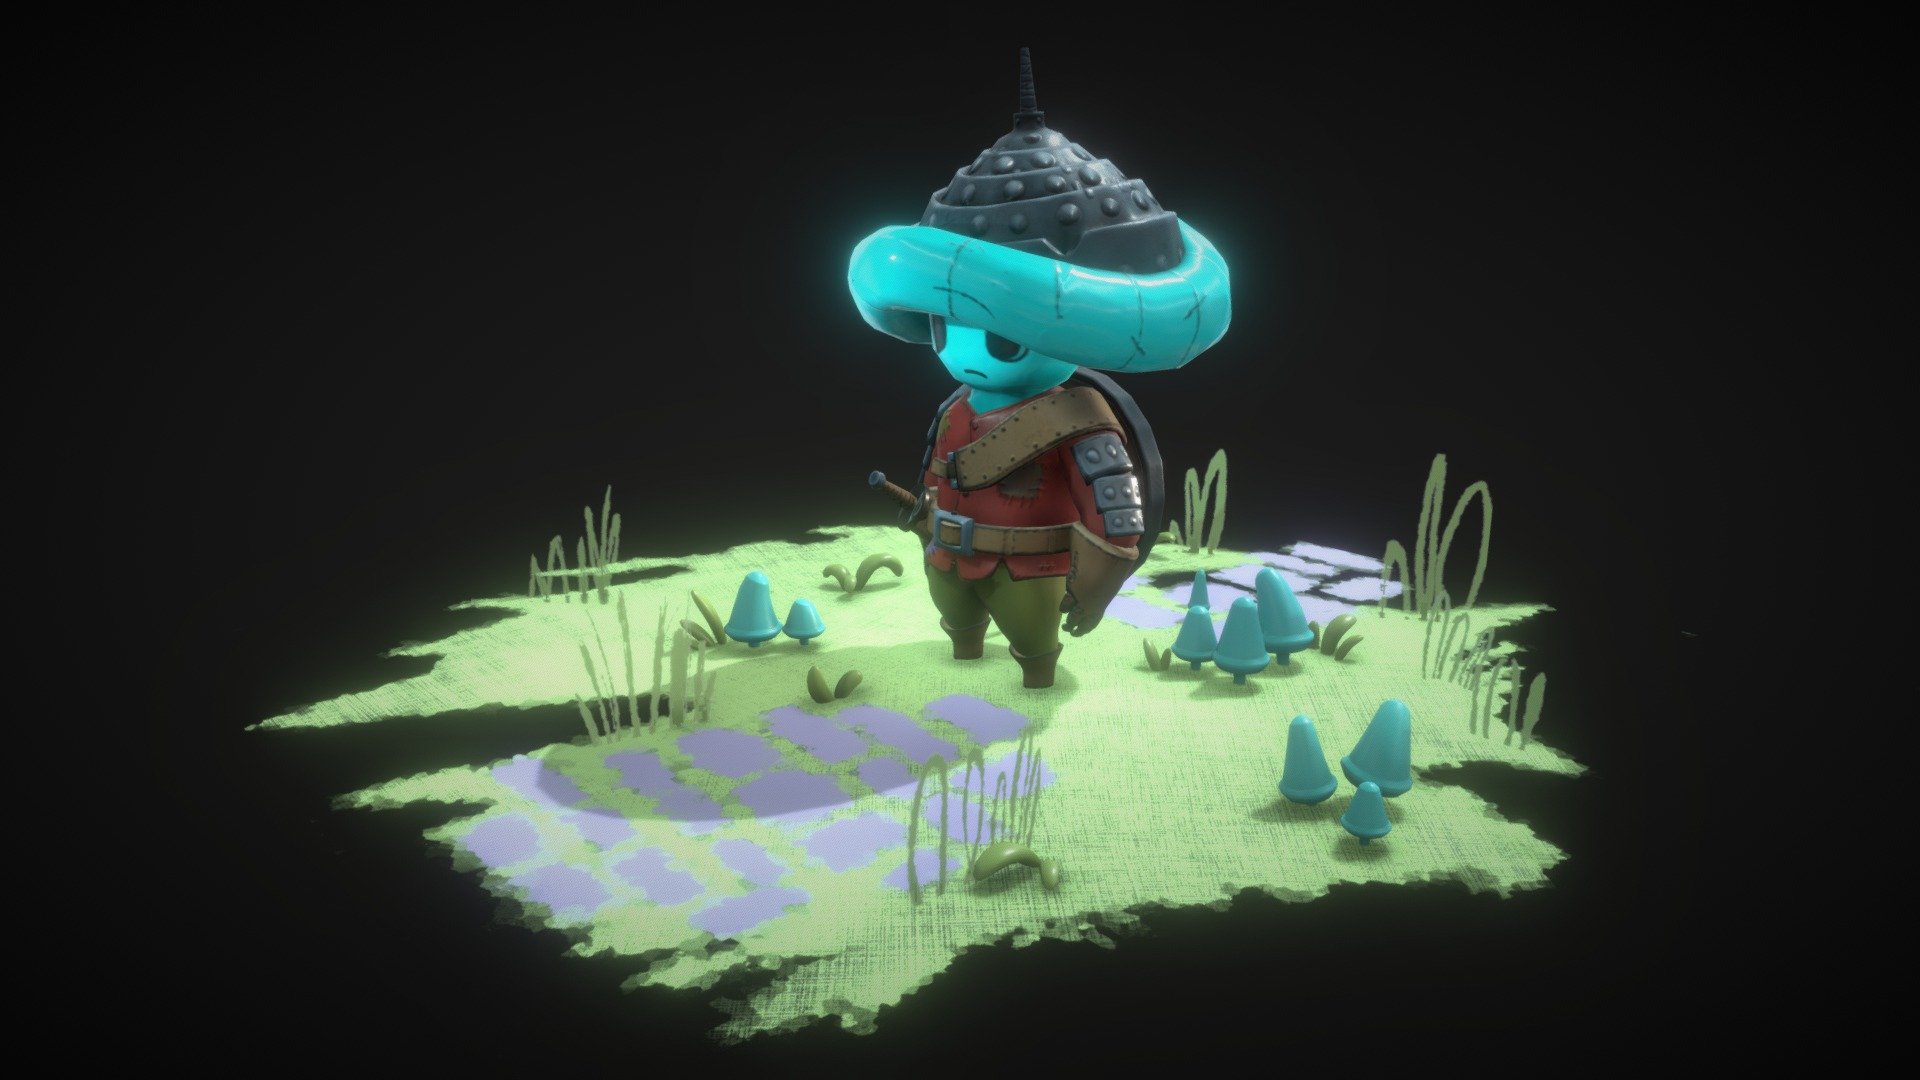 A 3D Character Scene that I made based on an awesome character art by mattmcangusart.

Equipment Showcase: https://skfb.ly/orFqT - Mushroom Warrior - 3D model by Dantir 3d model